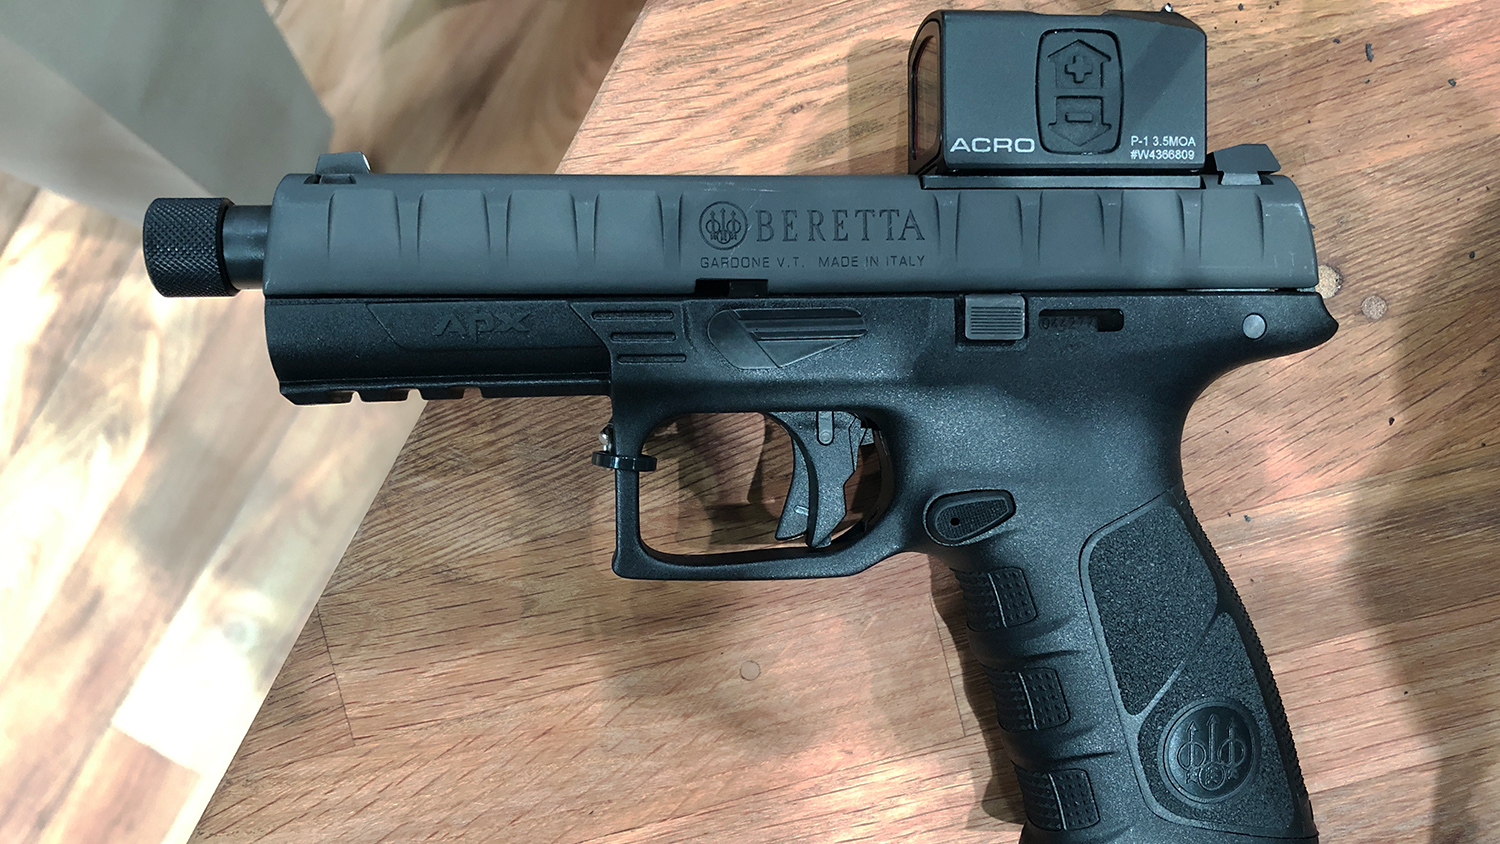 Aimpoint Acro P-1 micro red dot as displayed at SHOT Show 2019